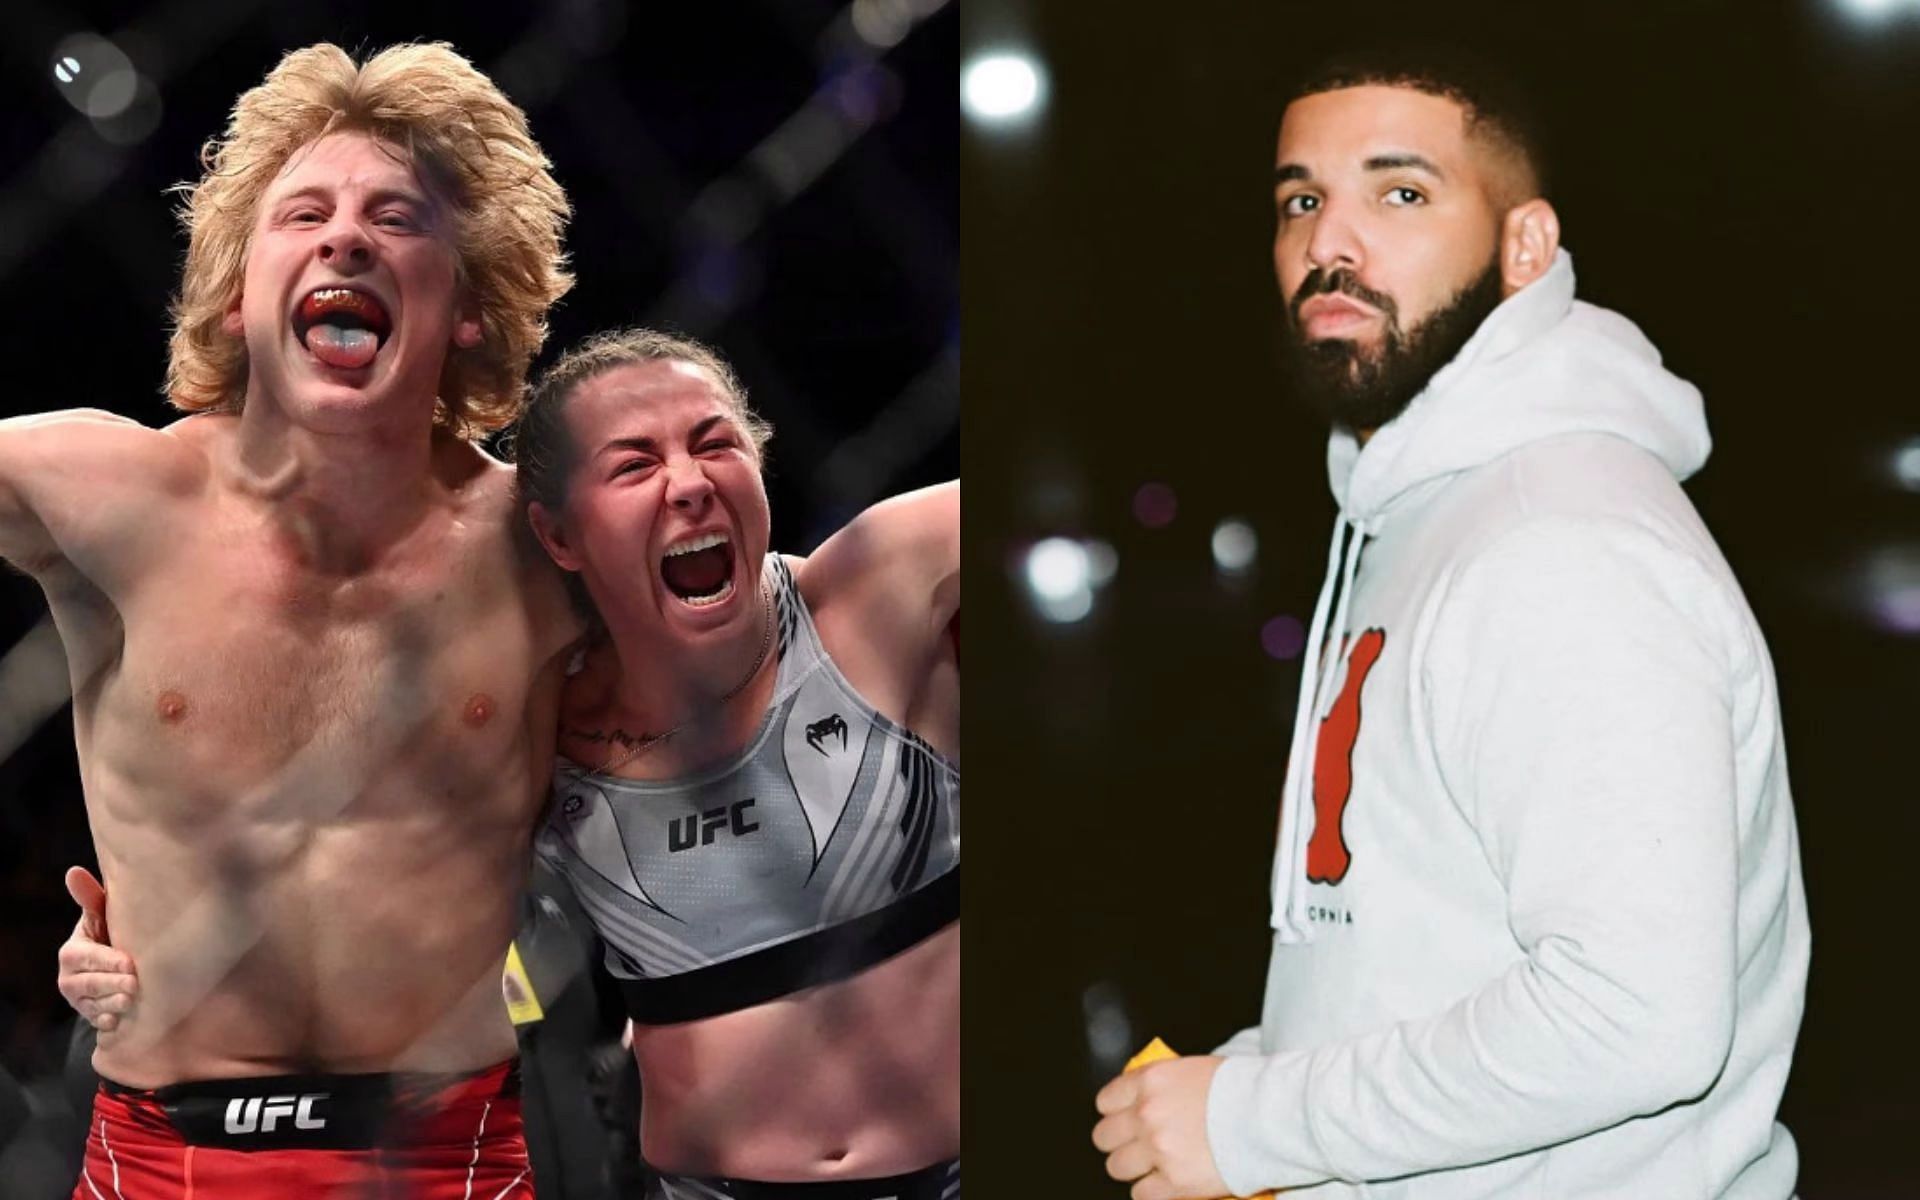 Paddy Pimblett and Molly McCann (left), Drake (right) [Image credit: @champagnepapi on Instagram]